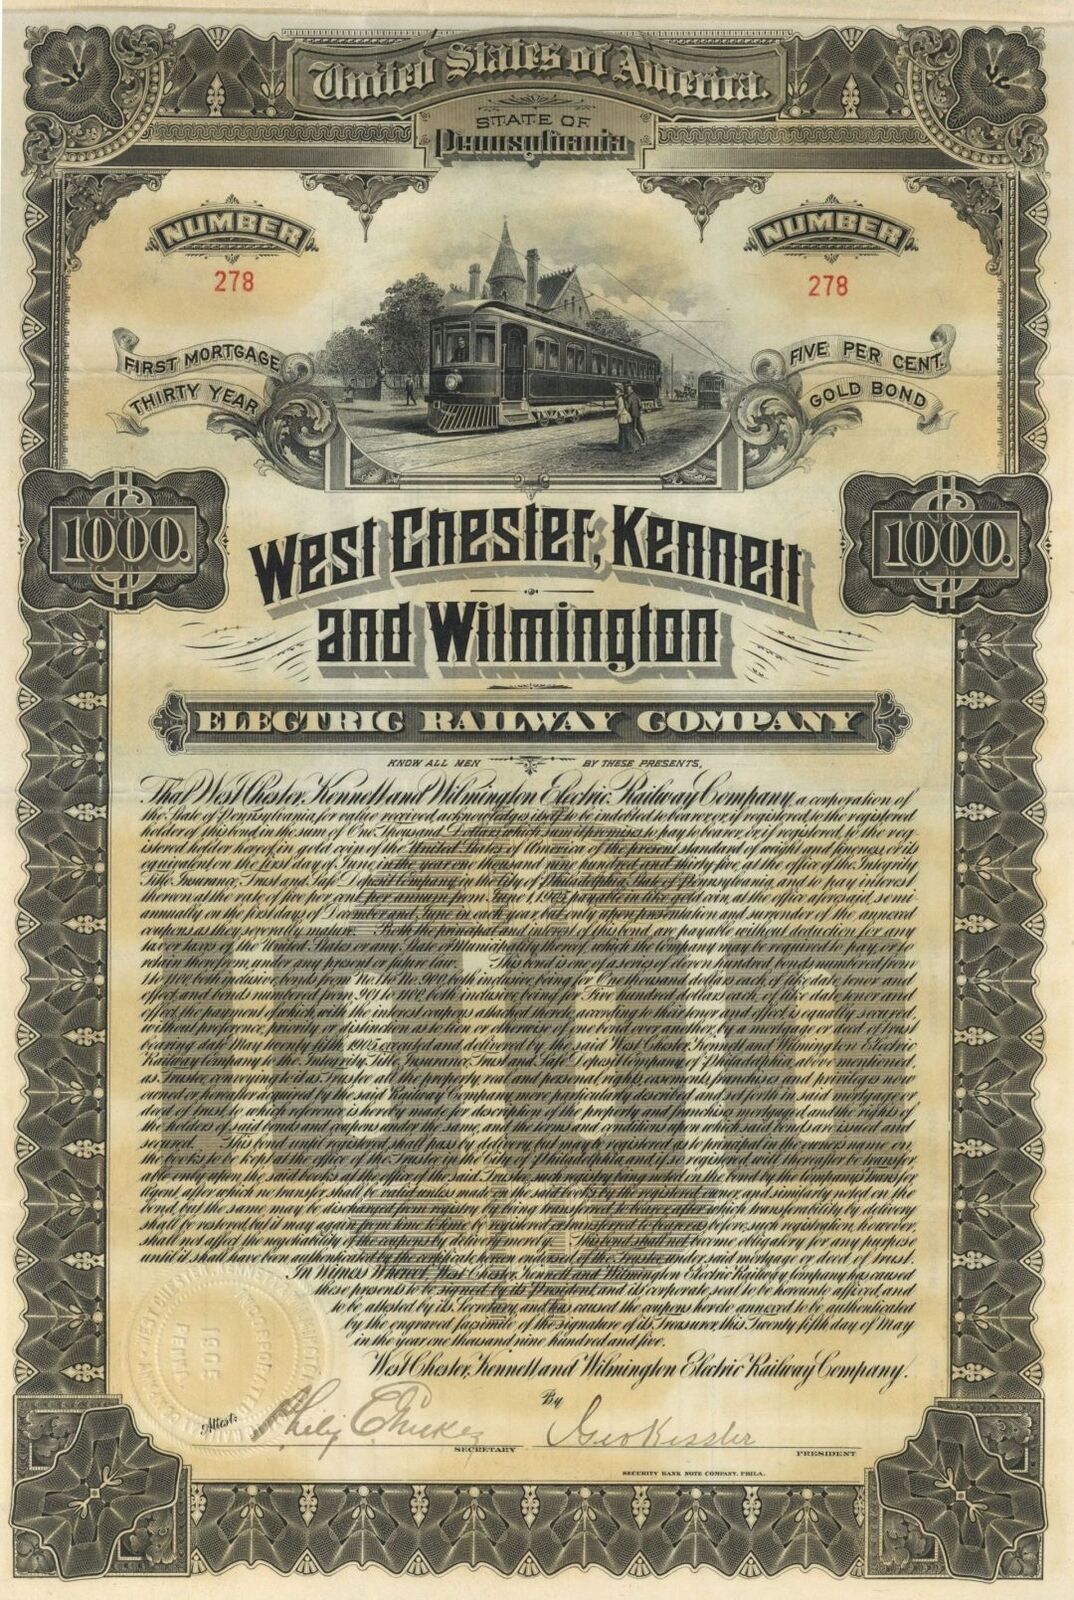 West Chester, Kennett and Wilmington Electric Railway Co. - 1905 dated $1000 Rai